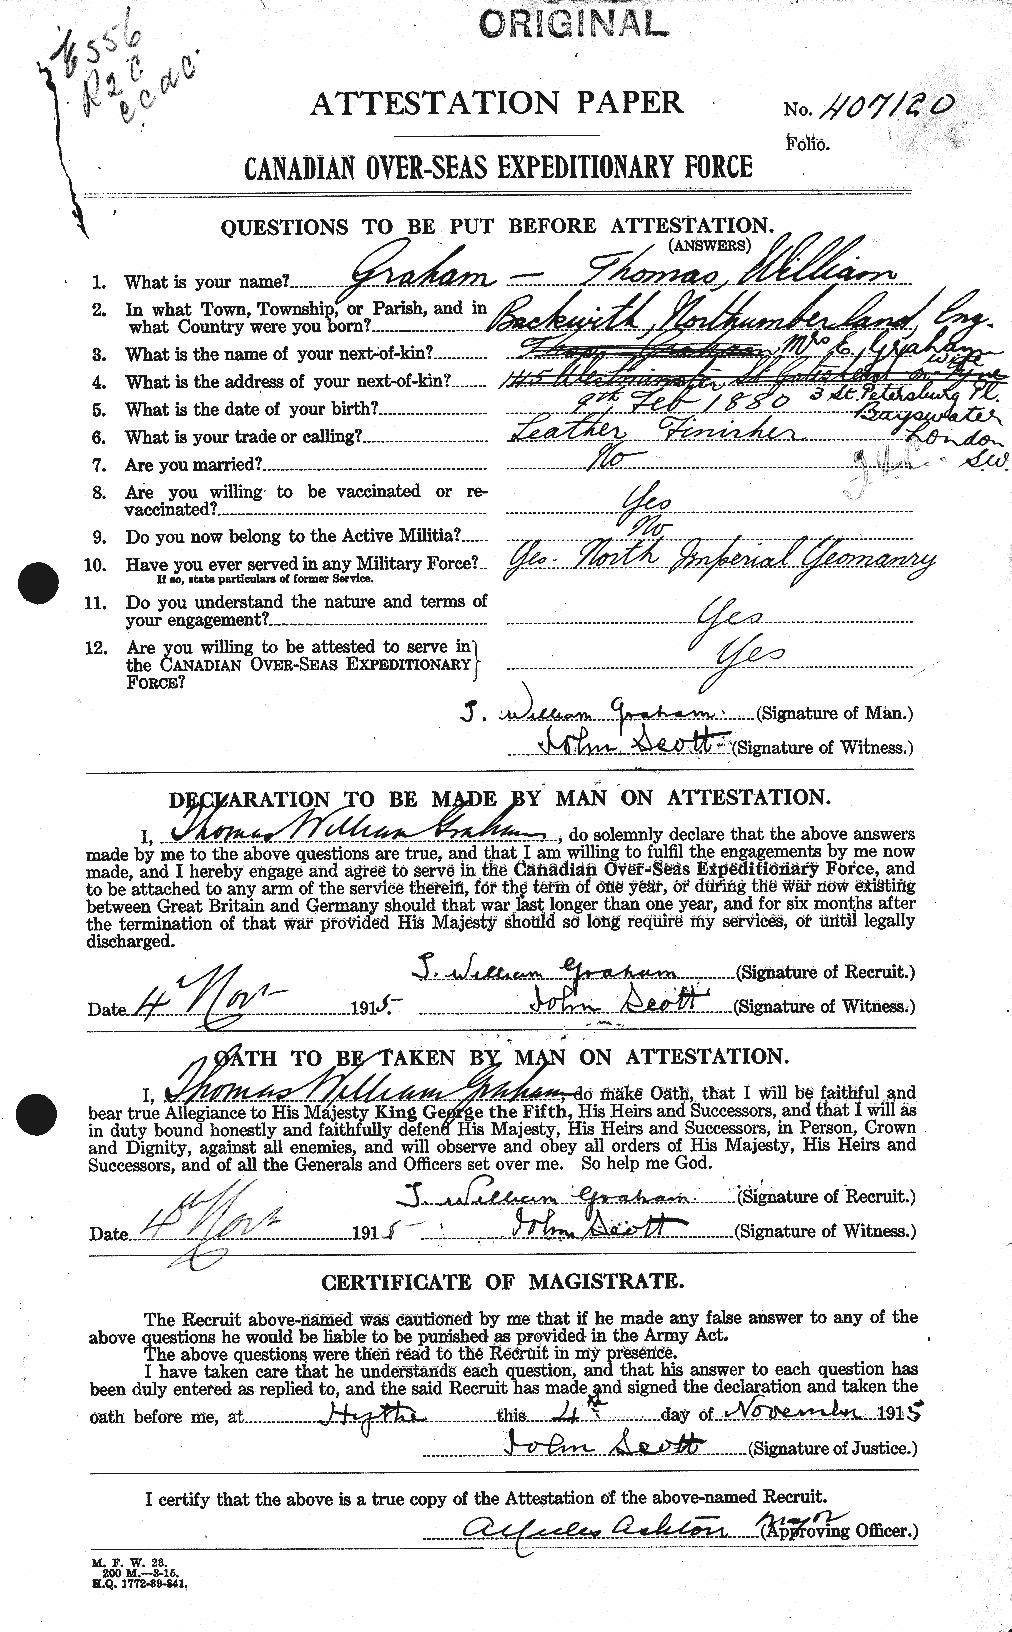 Personnel Records of the First World War - CEF 359531a